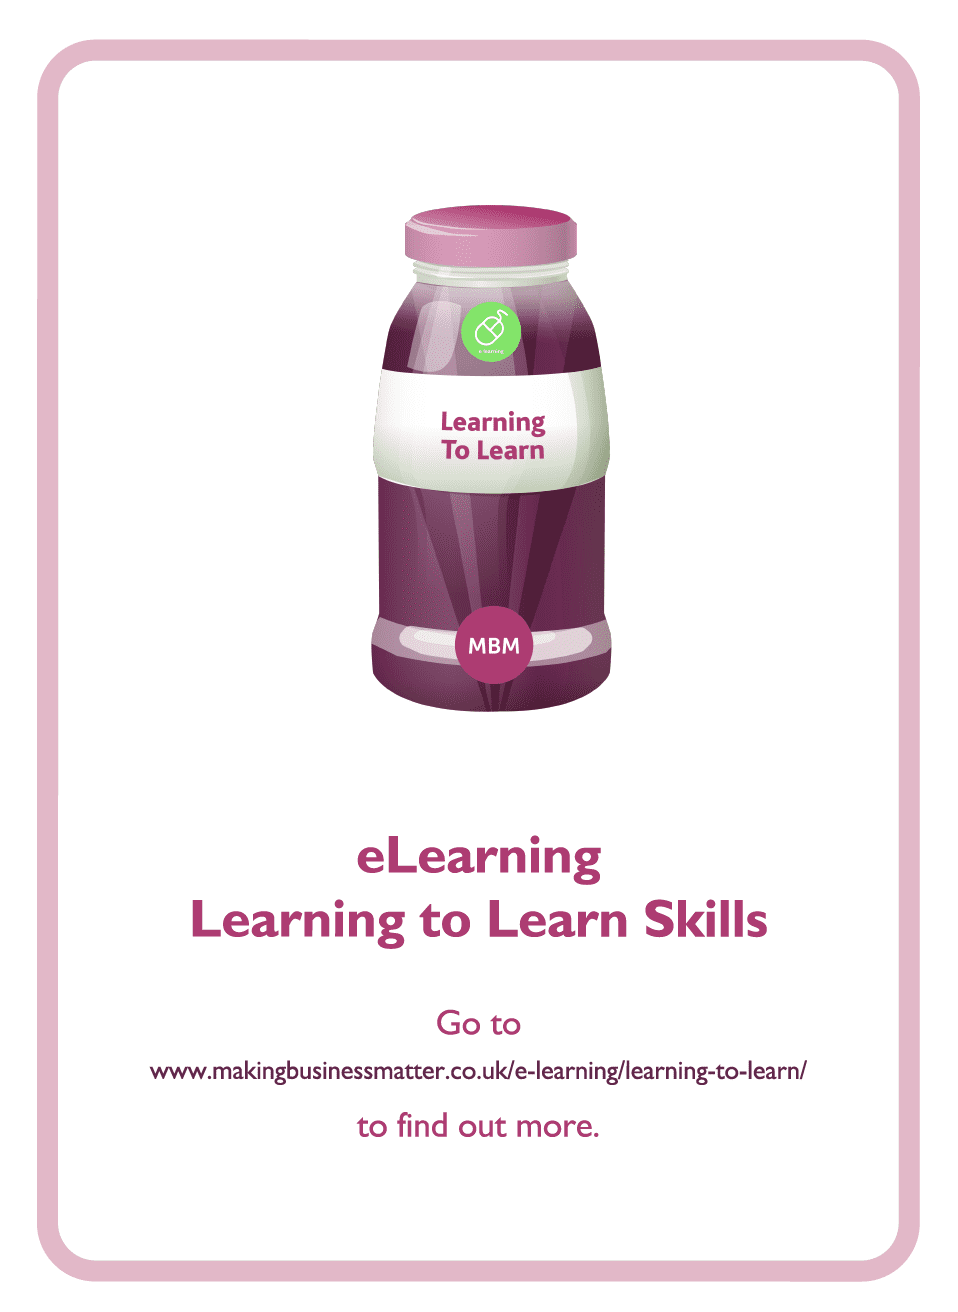 Learning to Learn coaching card titled eLearning